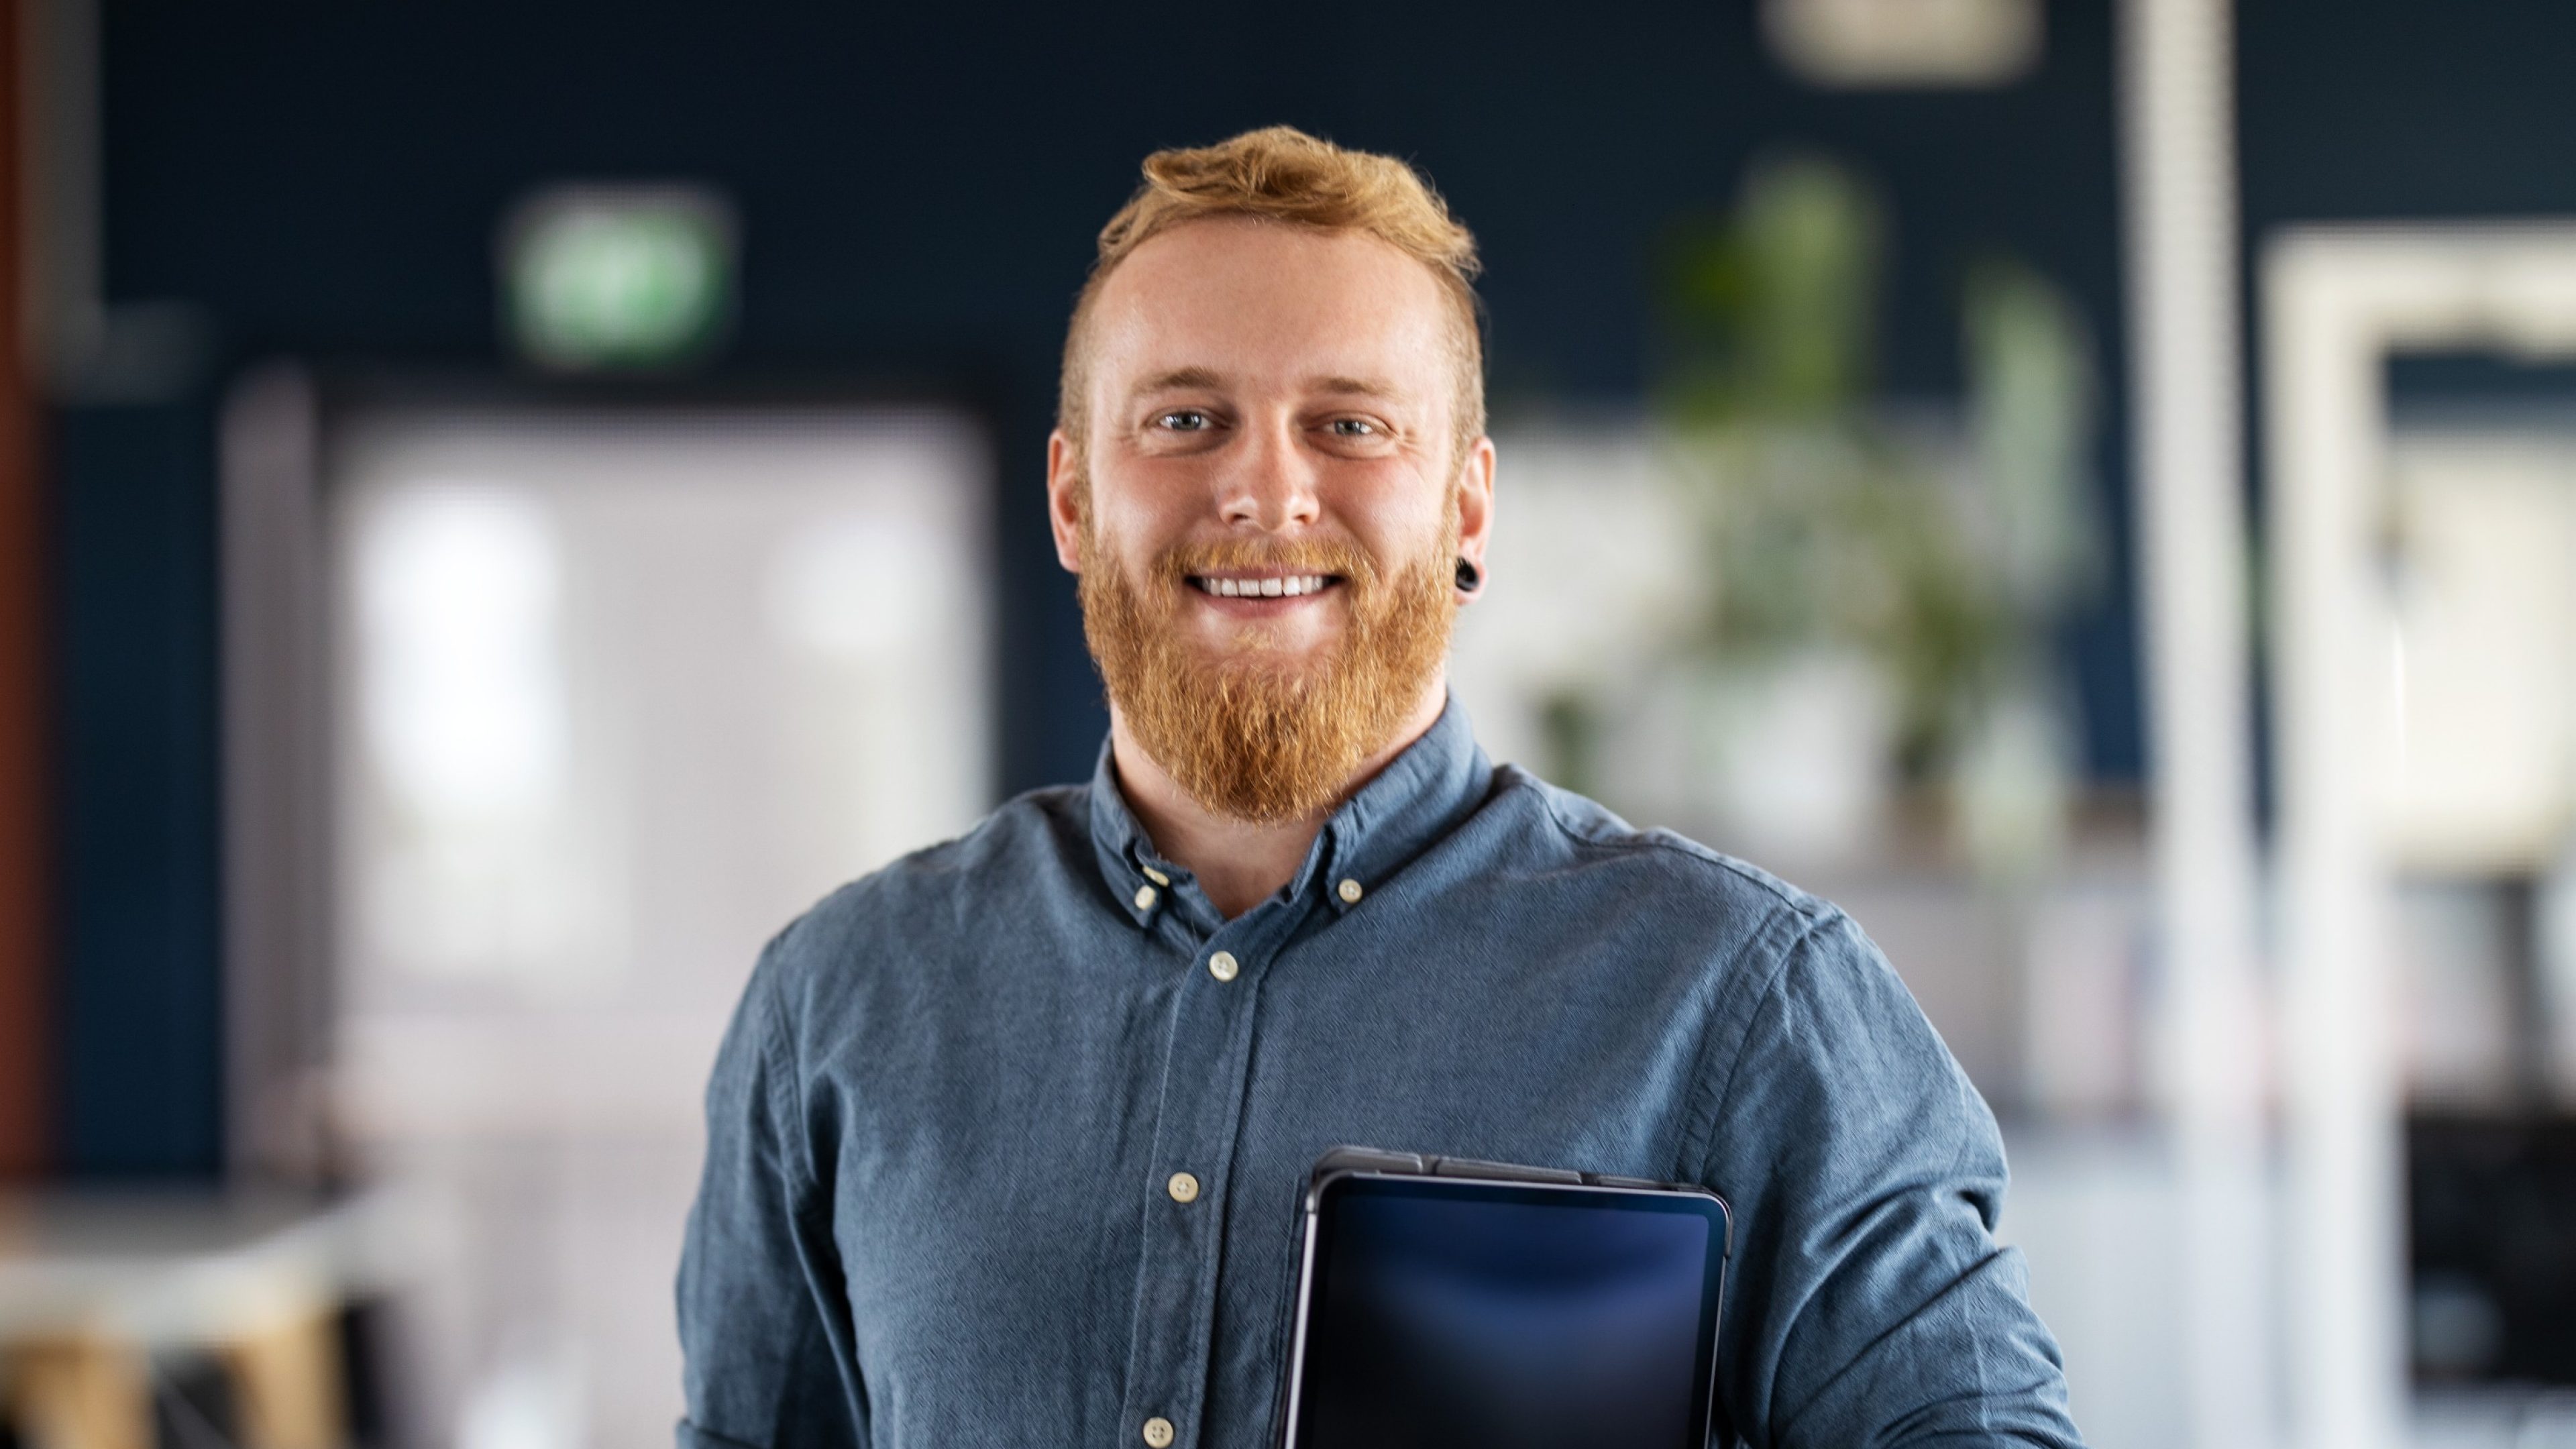 Portrait of a businessman with beard standing in office holding digital tablet. Confident male business executive in office looking at camera.